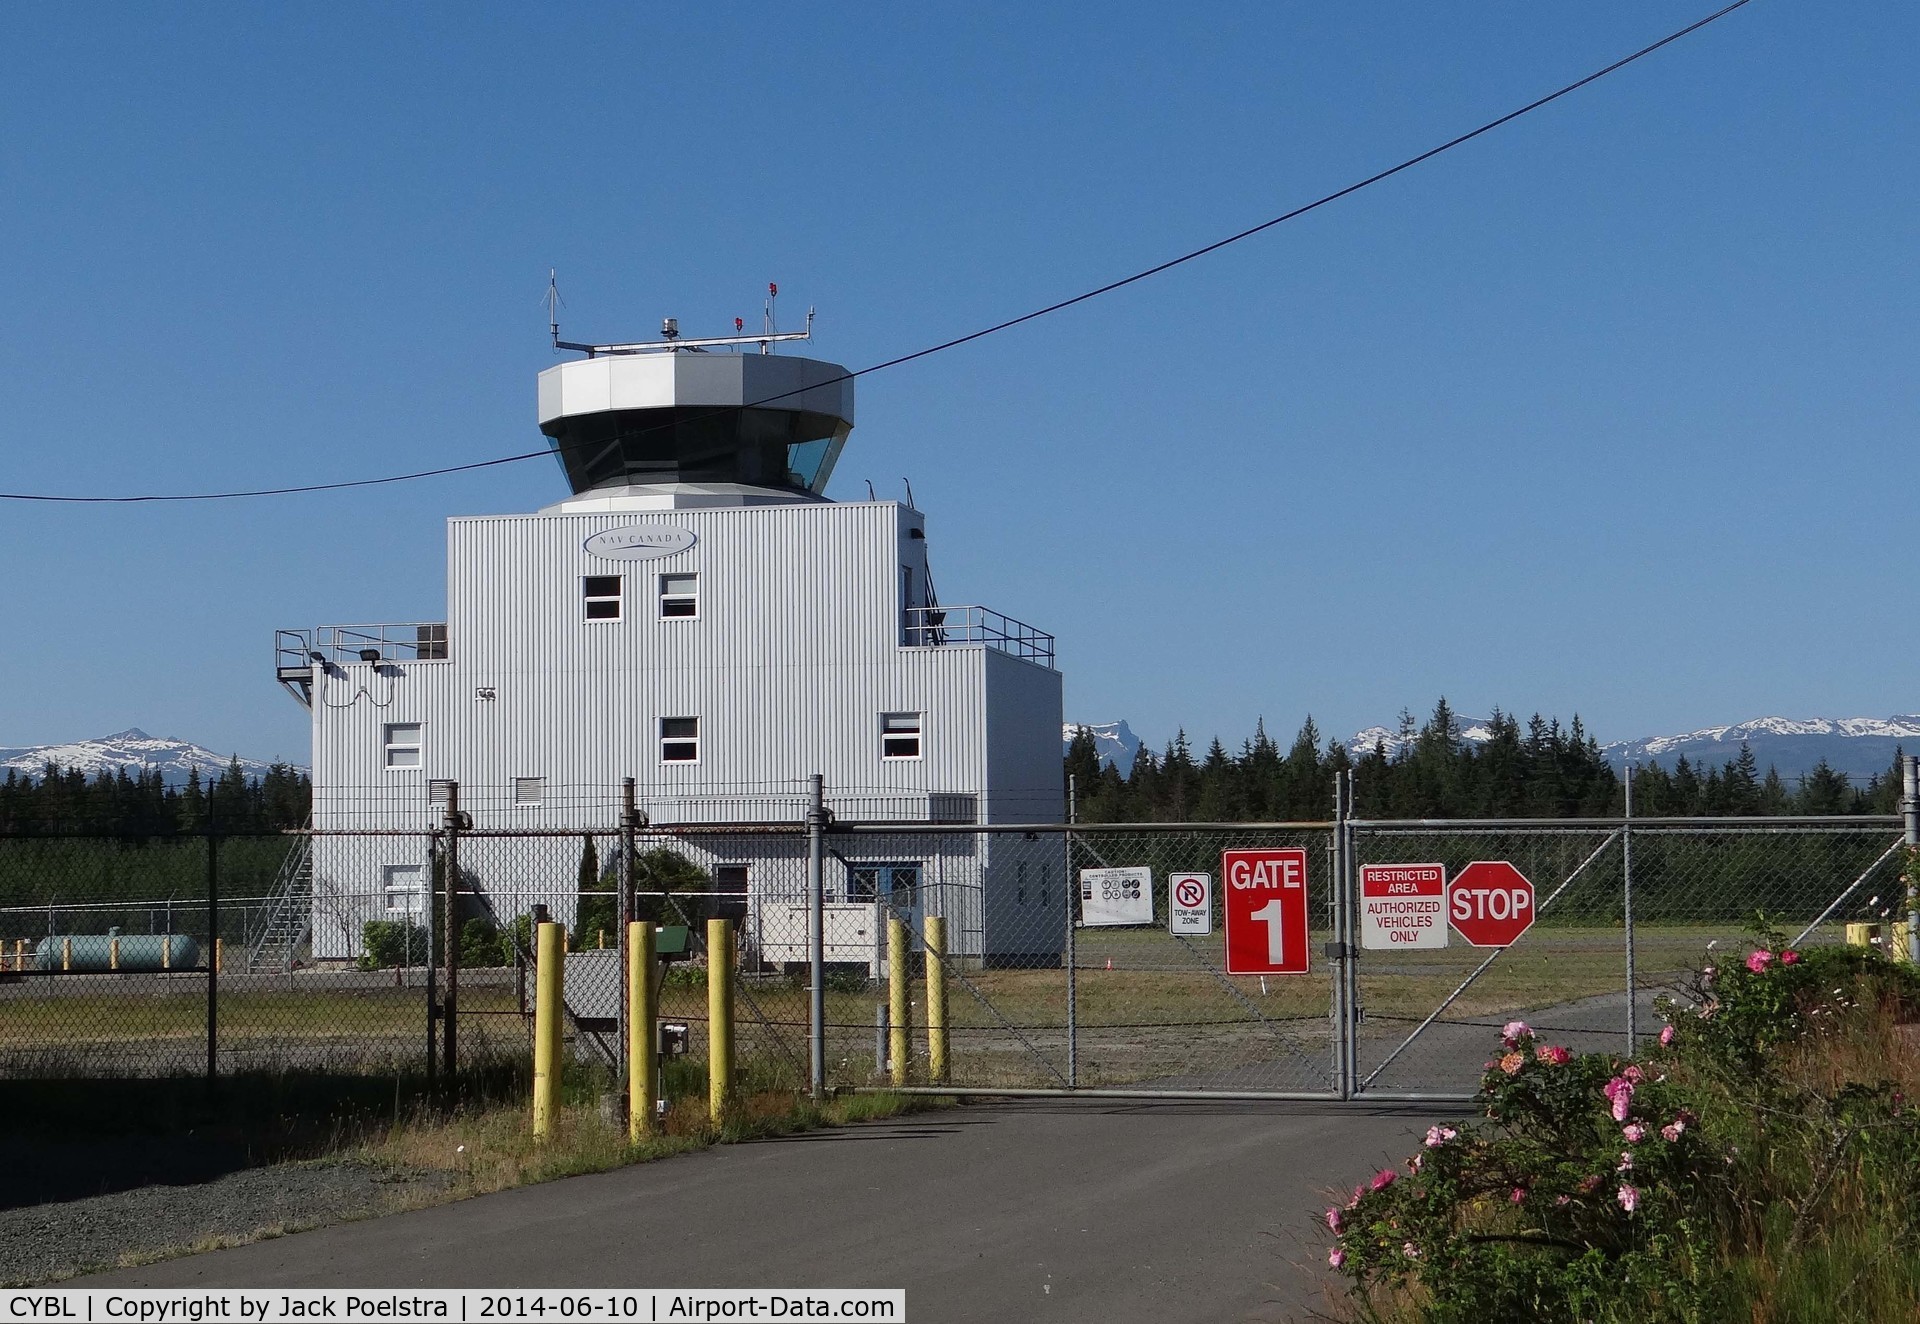 Campbell River Airport, Campbell River, British Columbia Canada (CYBL) - Tower at Campbell River airport, BC.